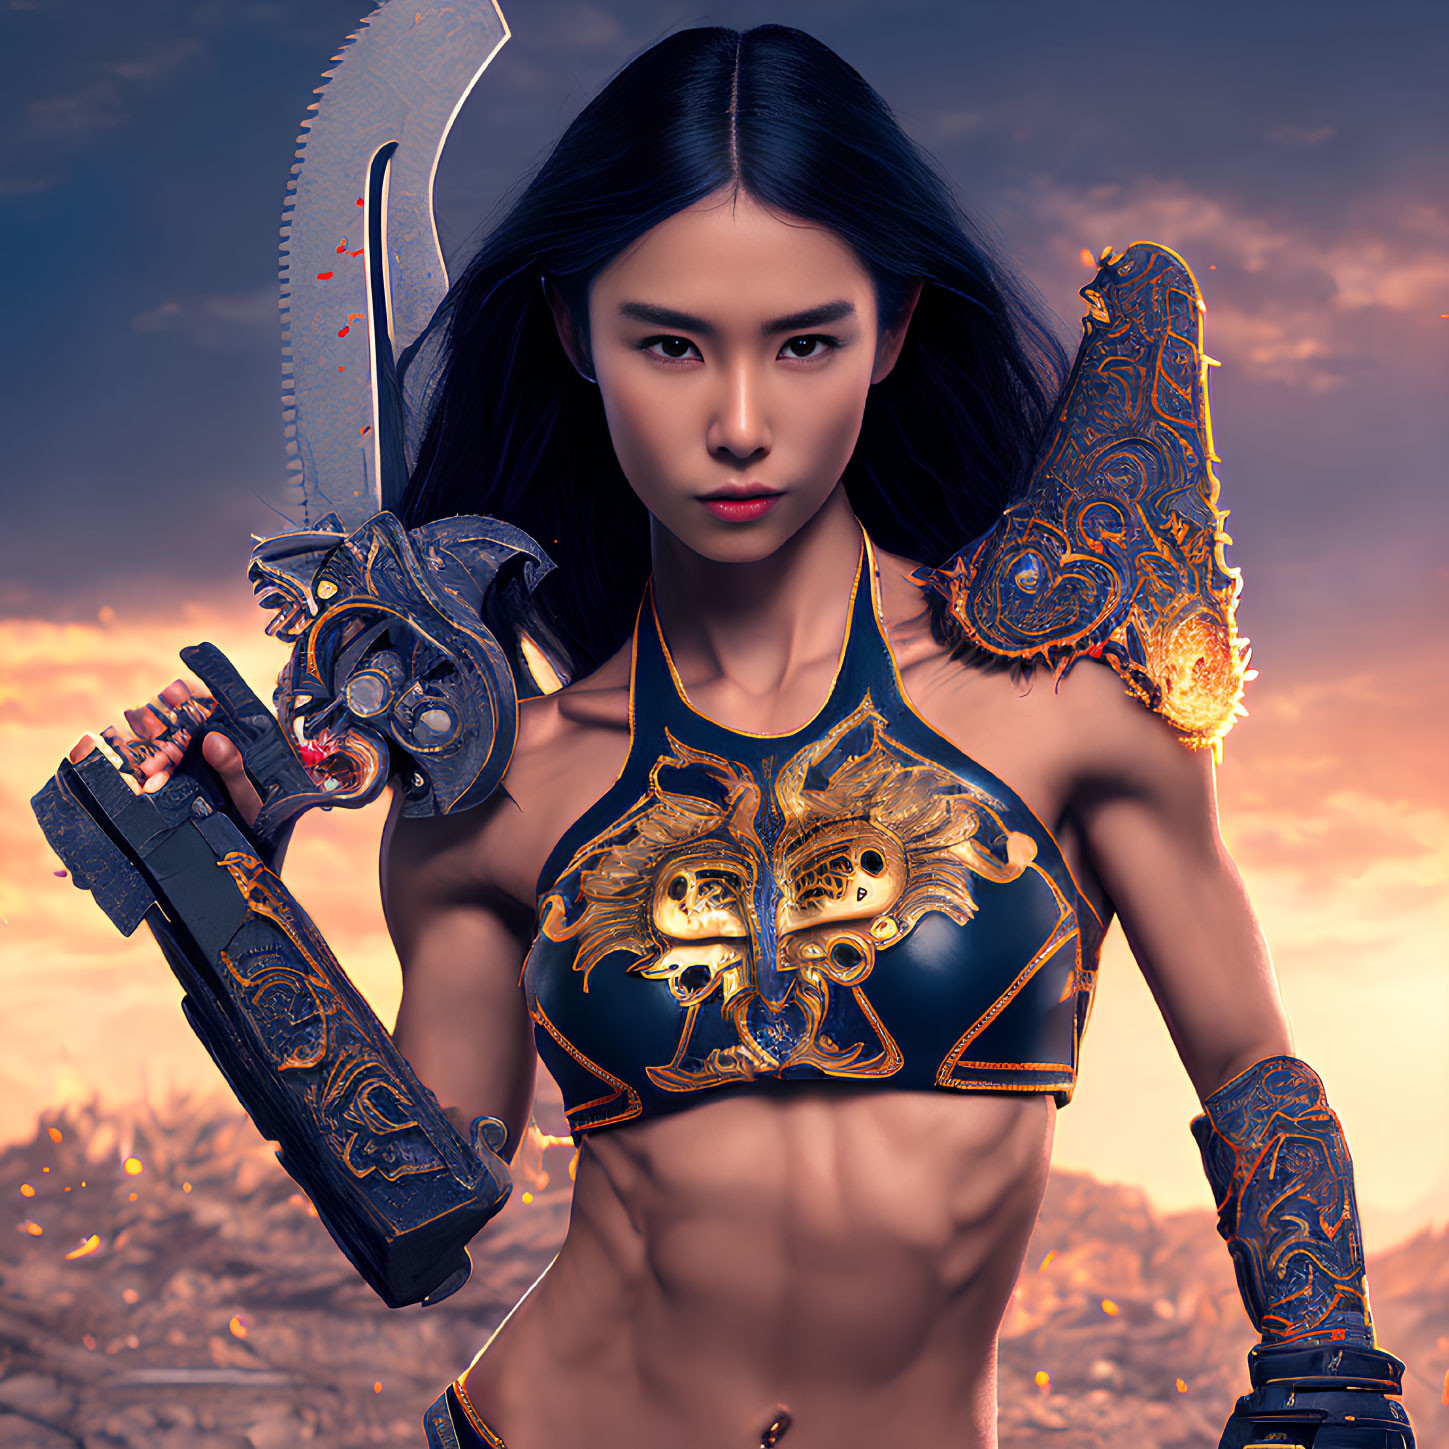 Warrior woman with arm cannon, ornate armor, and toothed blade in dramatic setting